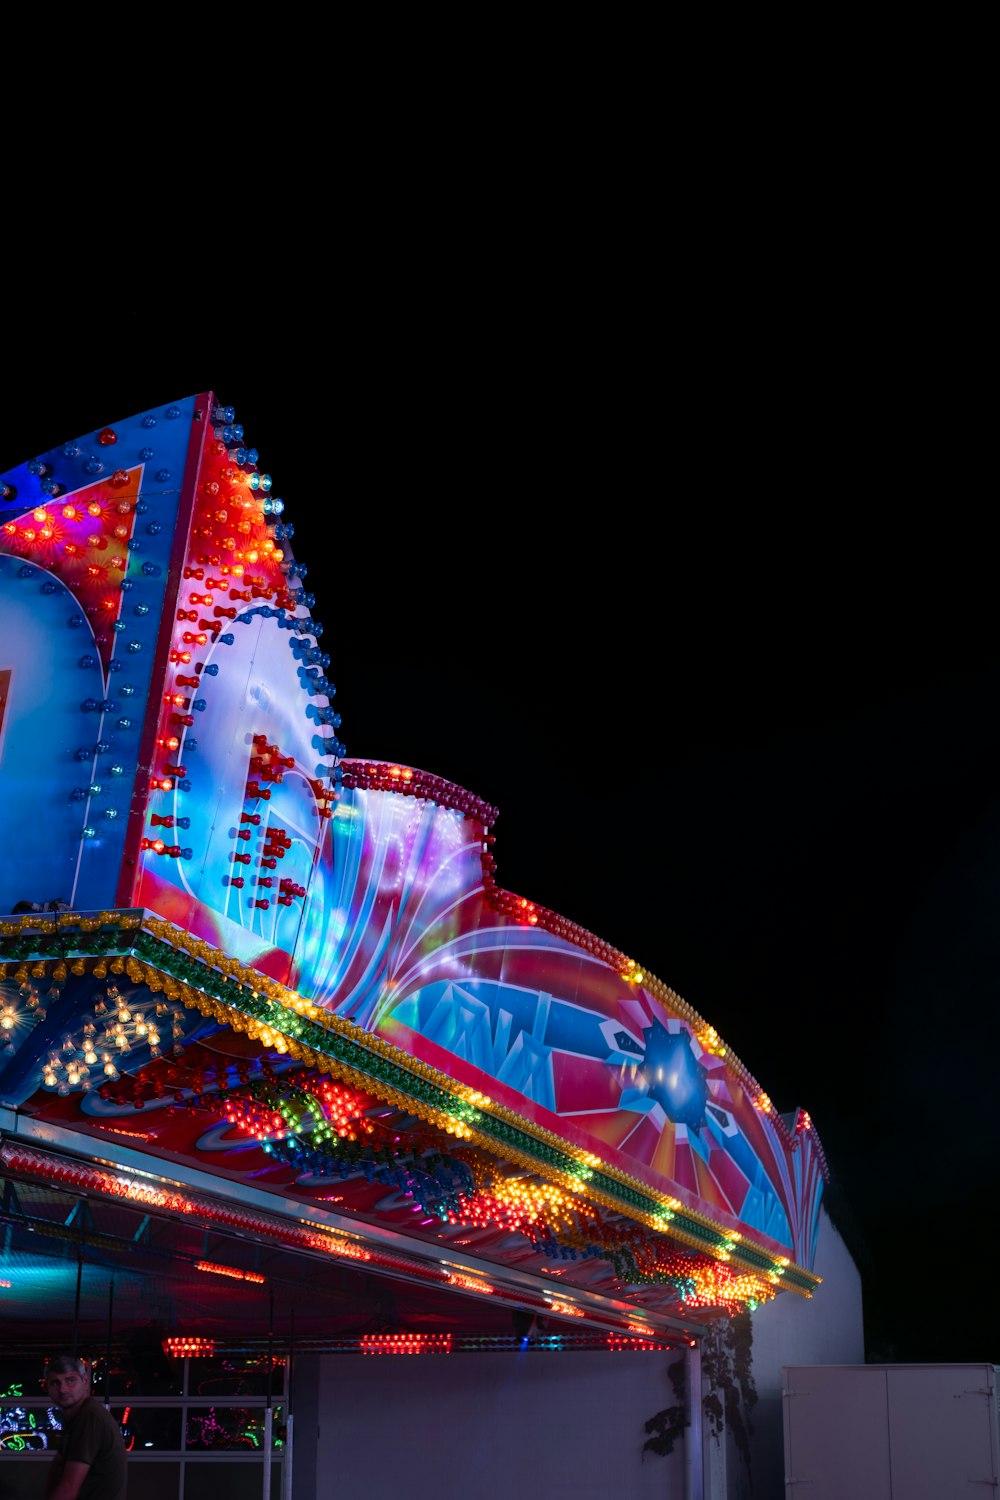 a brightly lit carnival ride at night time